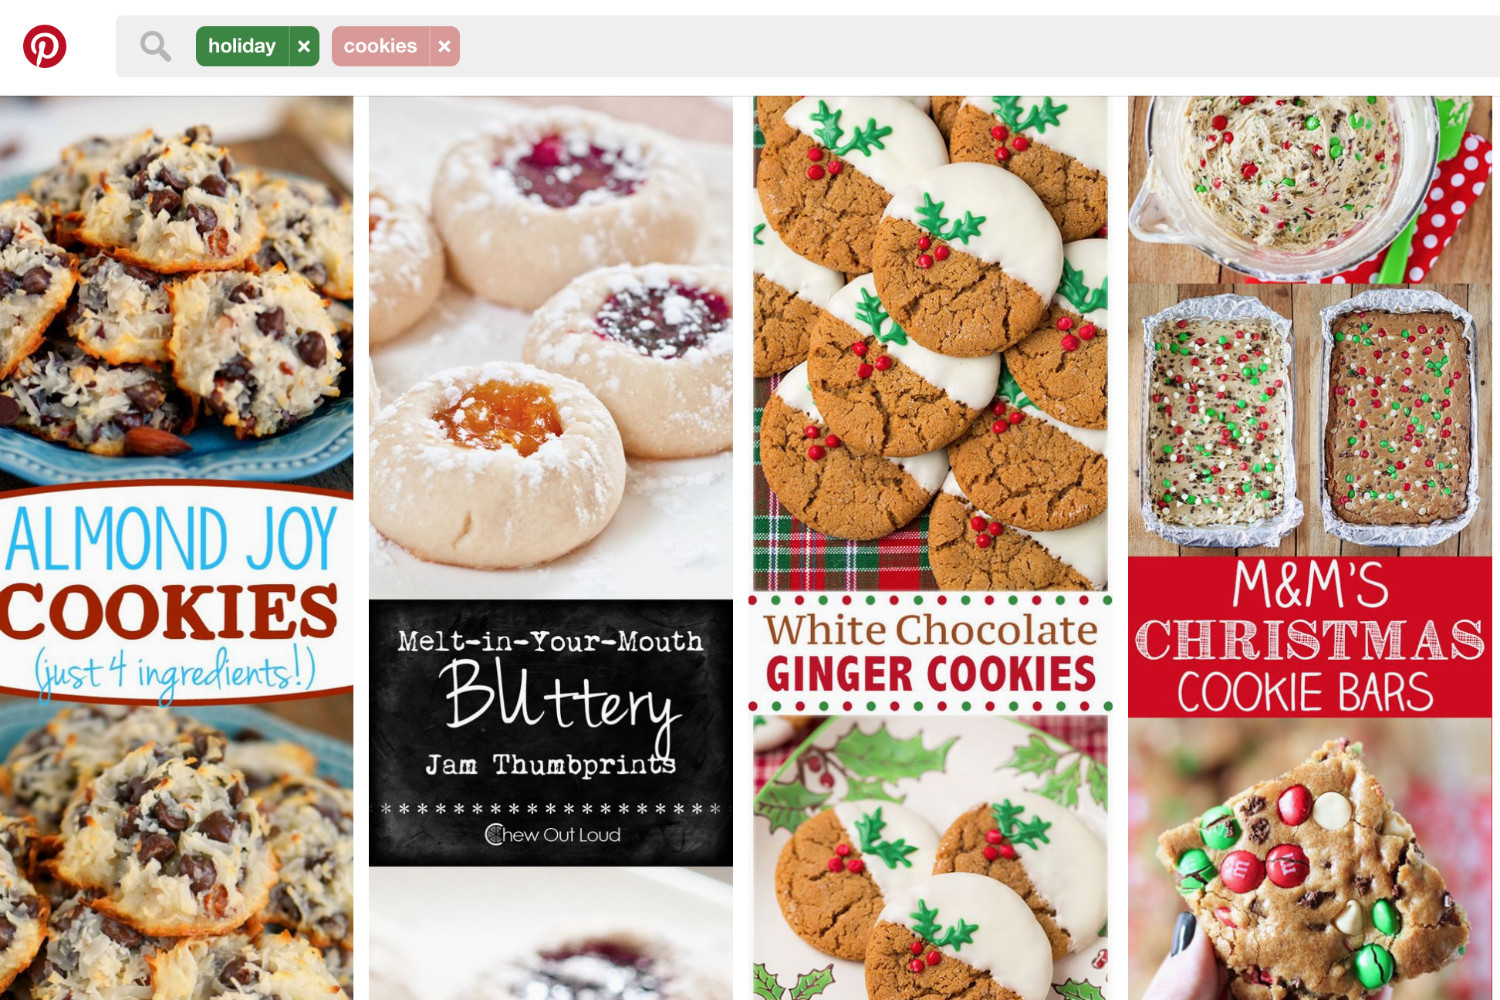 Christmas Cookies Pinterest
 What is Pinterest’s most popular Christmas cookie recipe